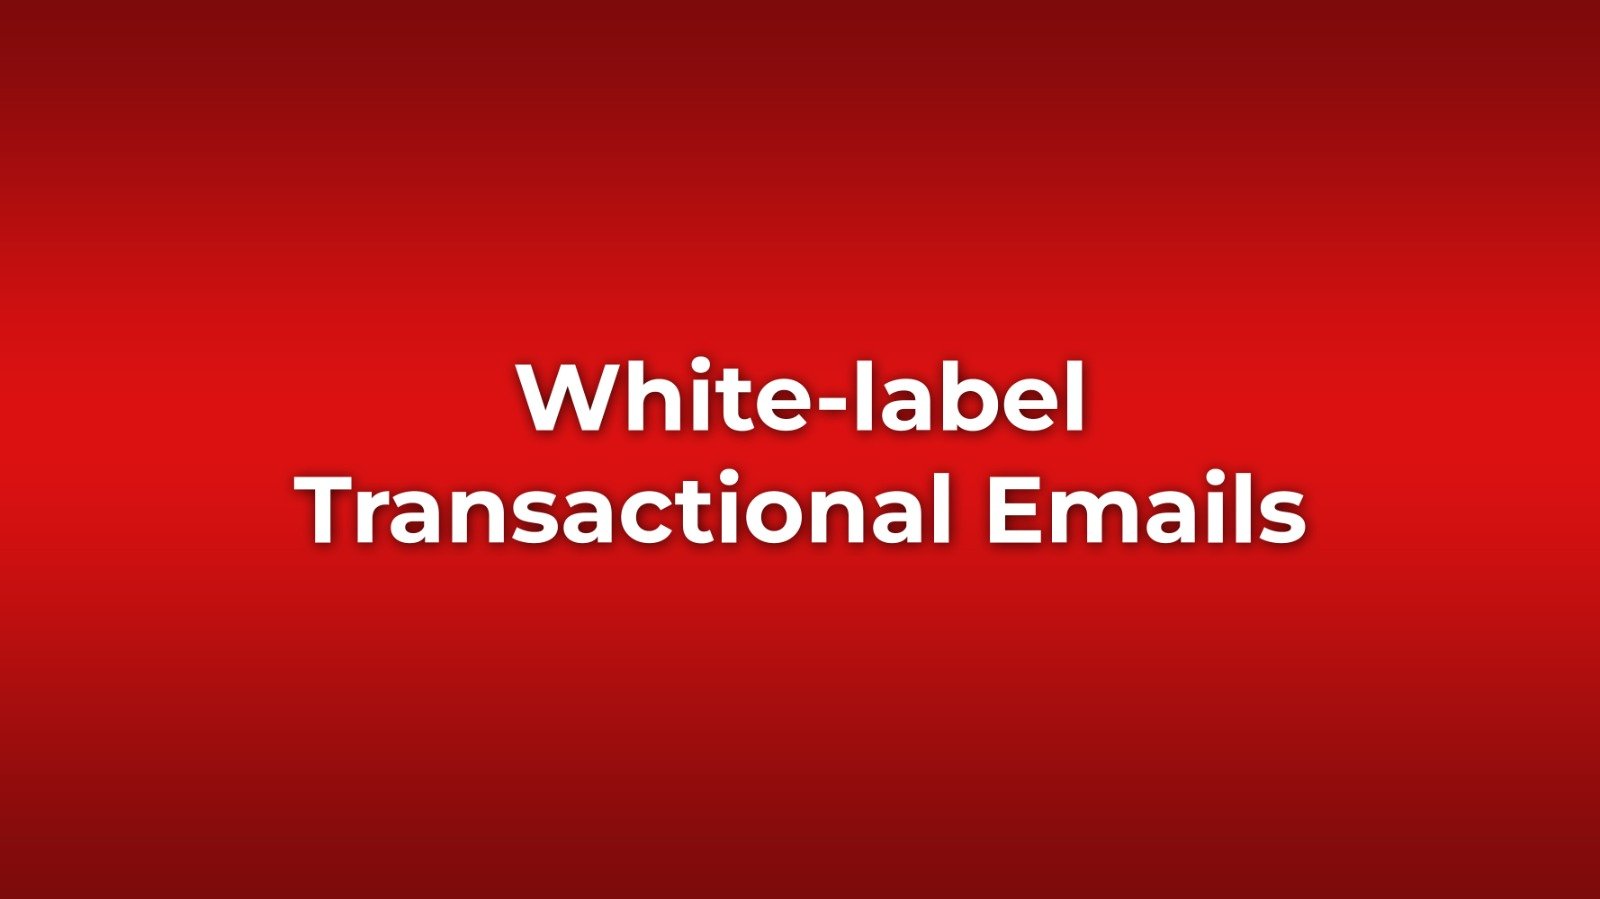 White-label Transactional Emails